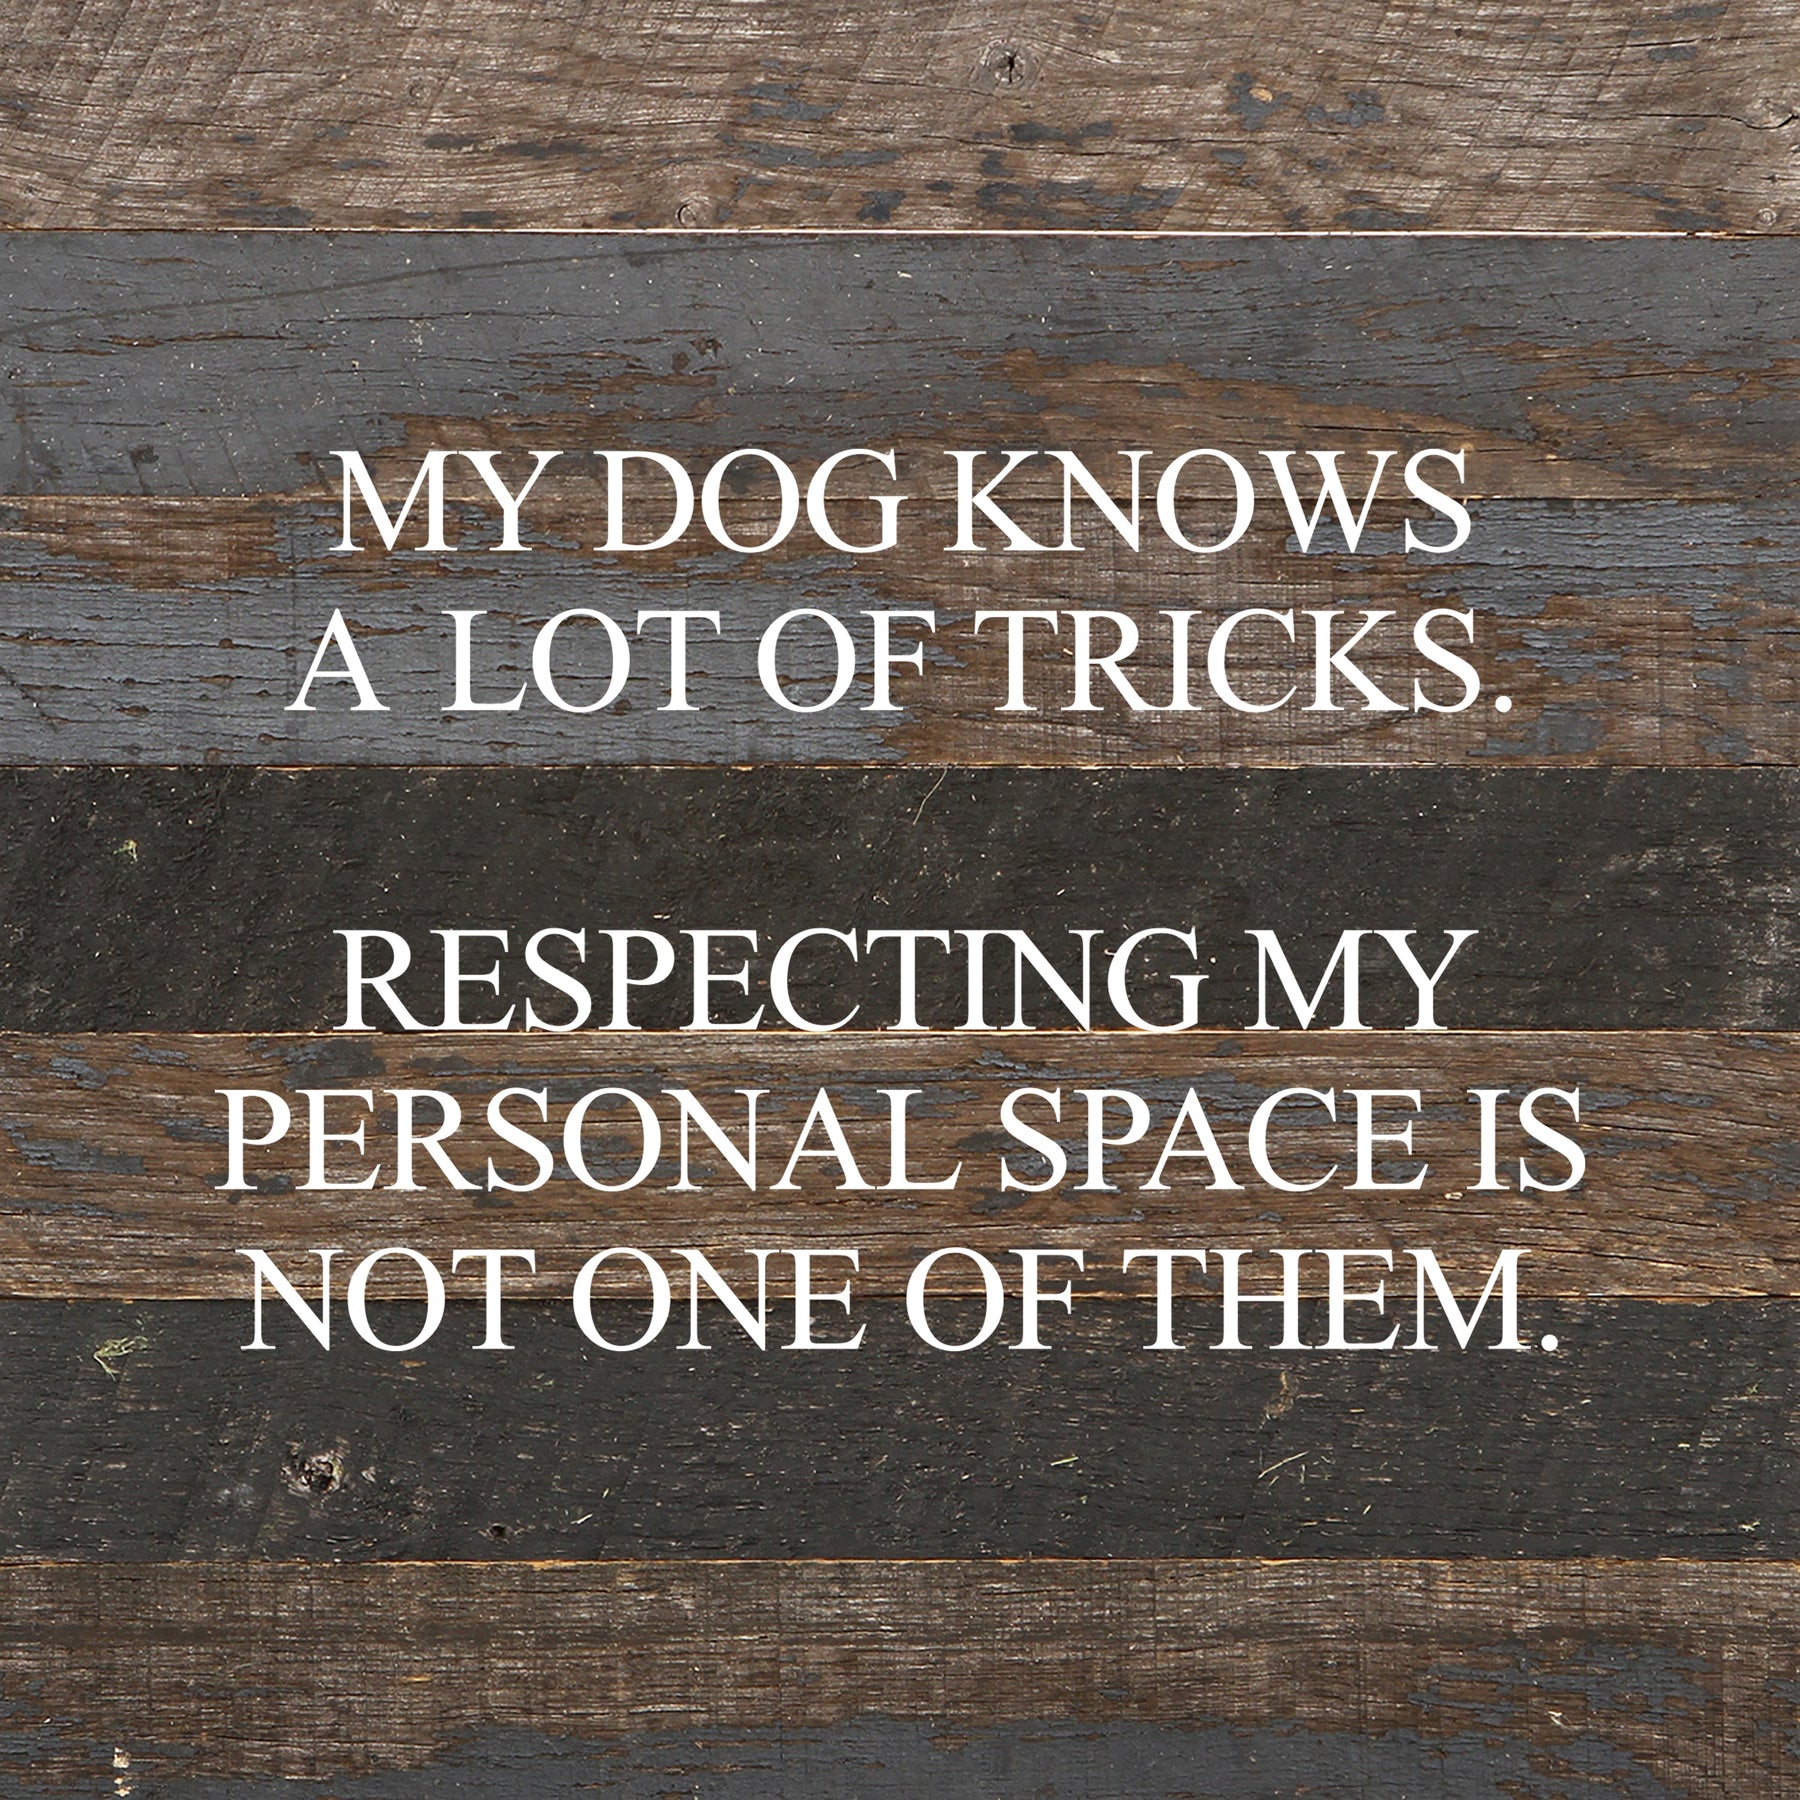 My dog knows a lot of tricks. Respecting my personal space is not one of them. / 10"x10" Reclaimed Wood Sign